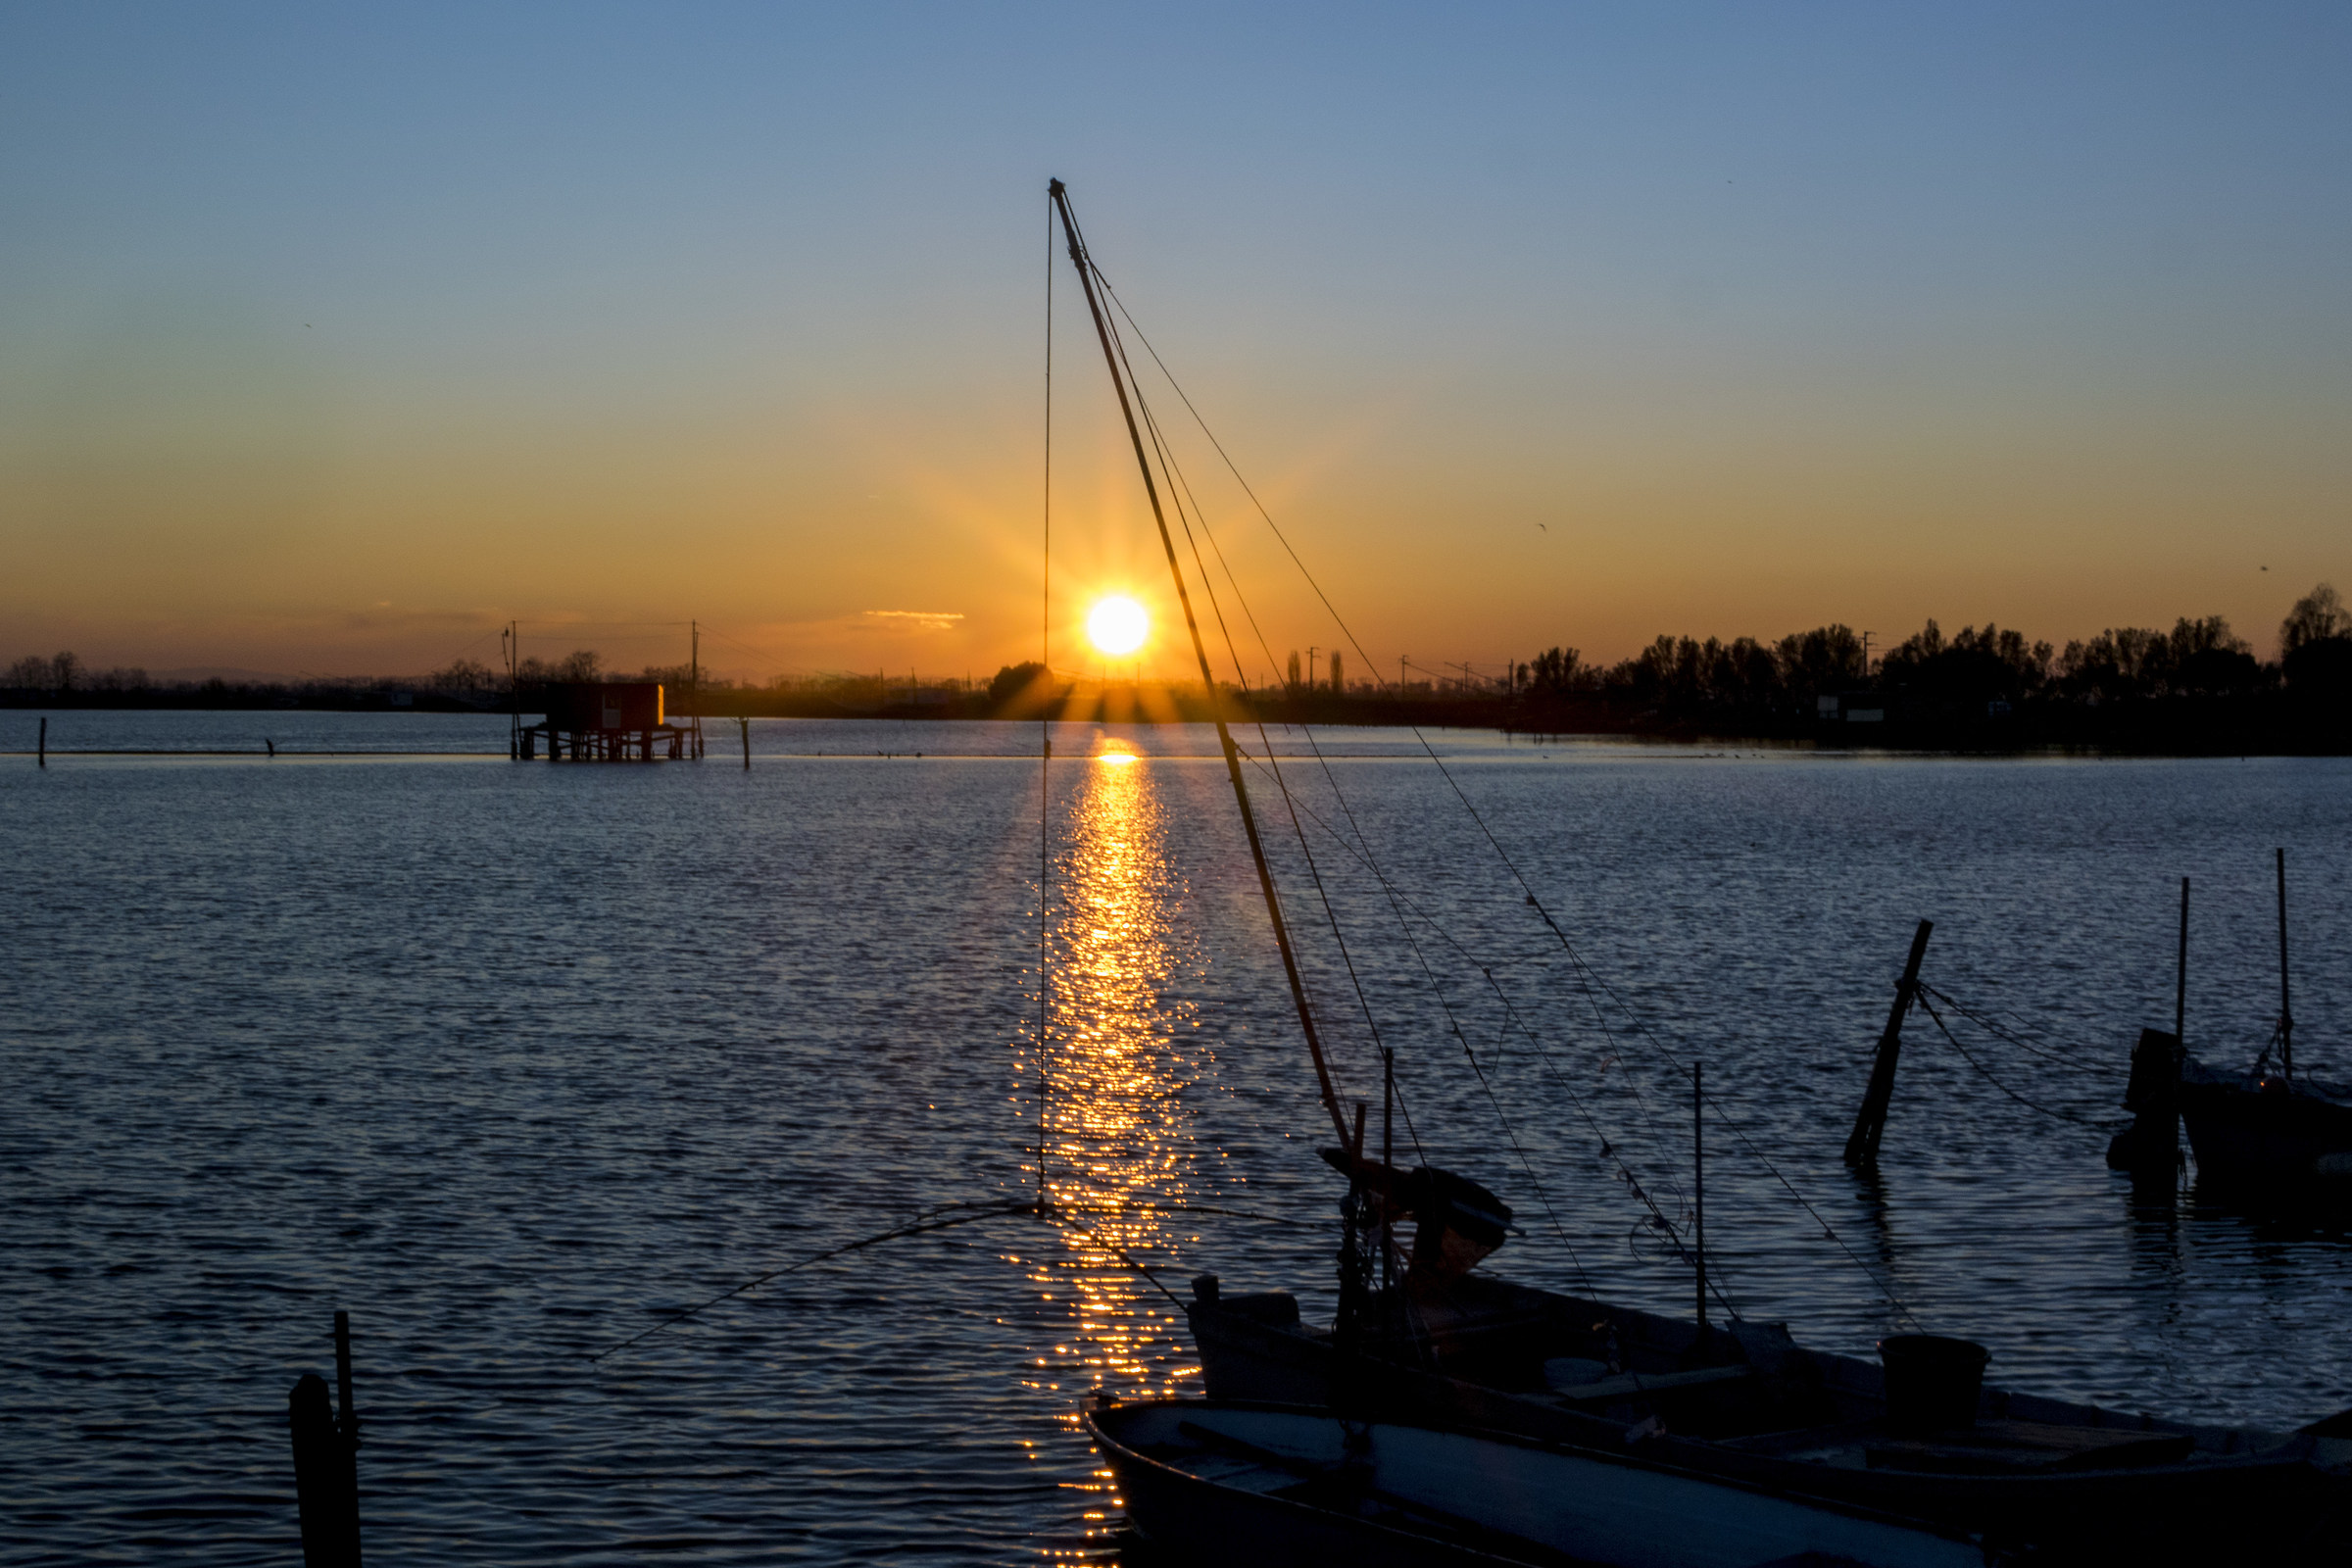 A sunset in Comacchio...